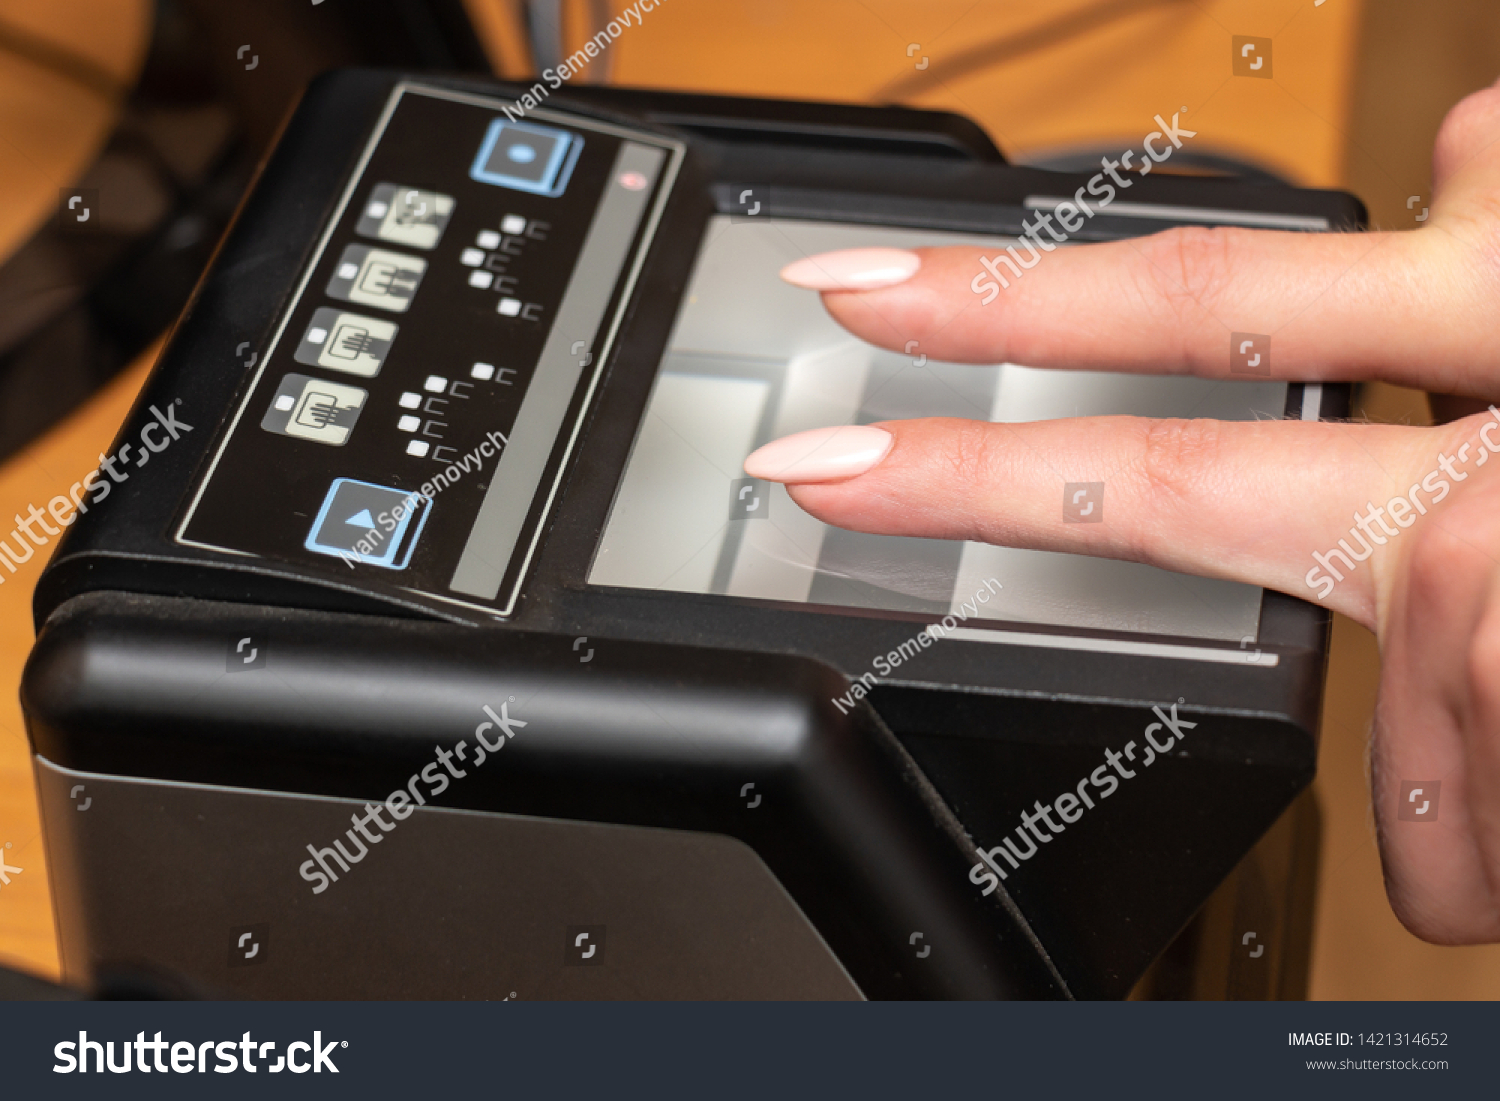 The process of scanning fingerprints during the check at border crossing. Female hand puts fingers to the fingerprint scanner. Biometric, identity verification and border control, immigration concept #1421314652